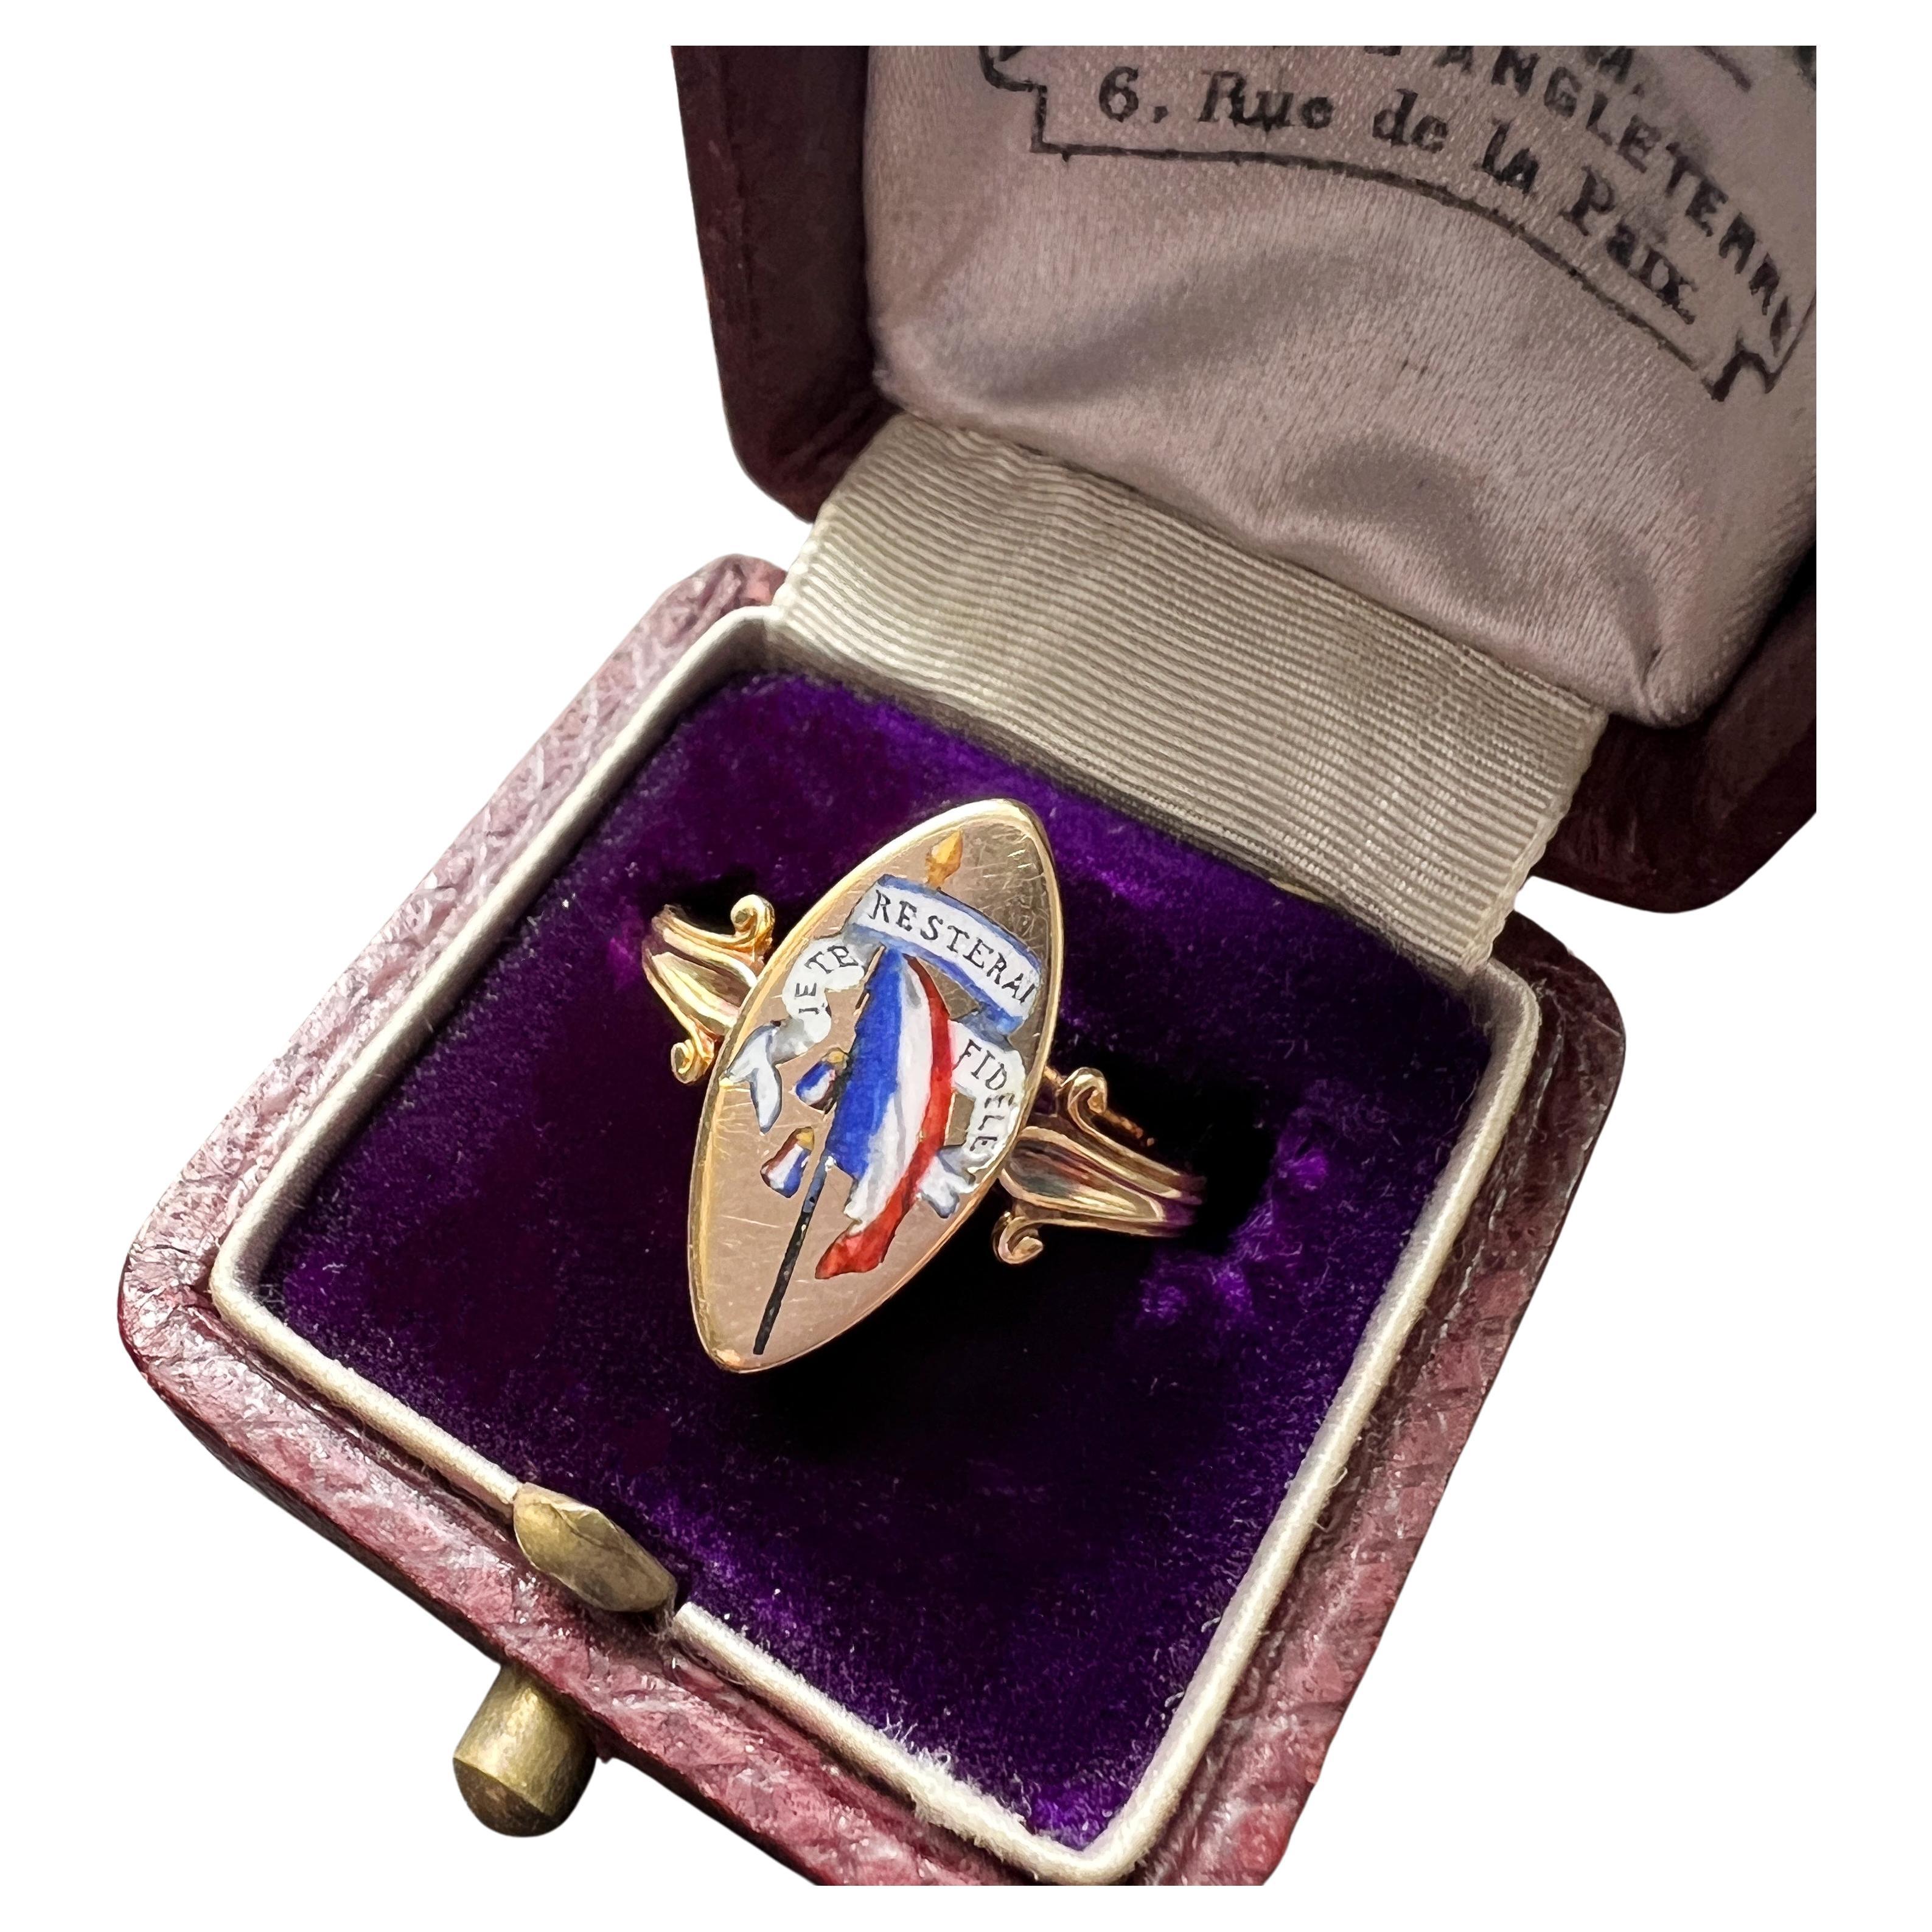 Rare Antique 18K ring “I will stay faithful to you”